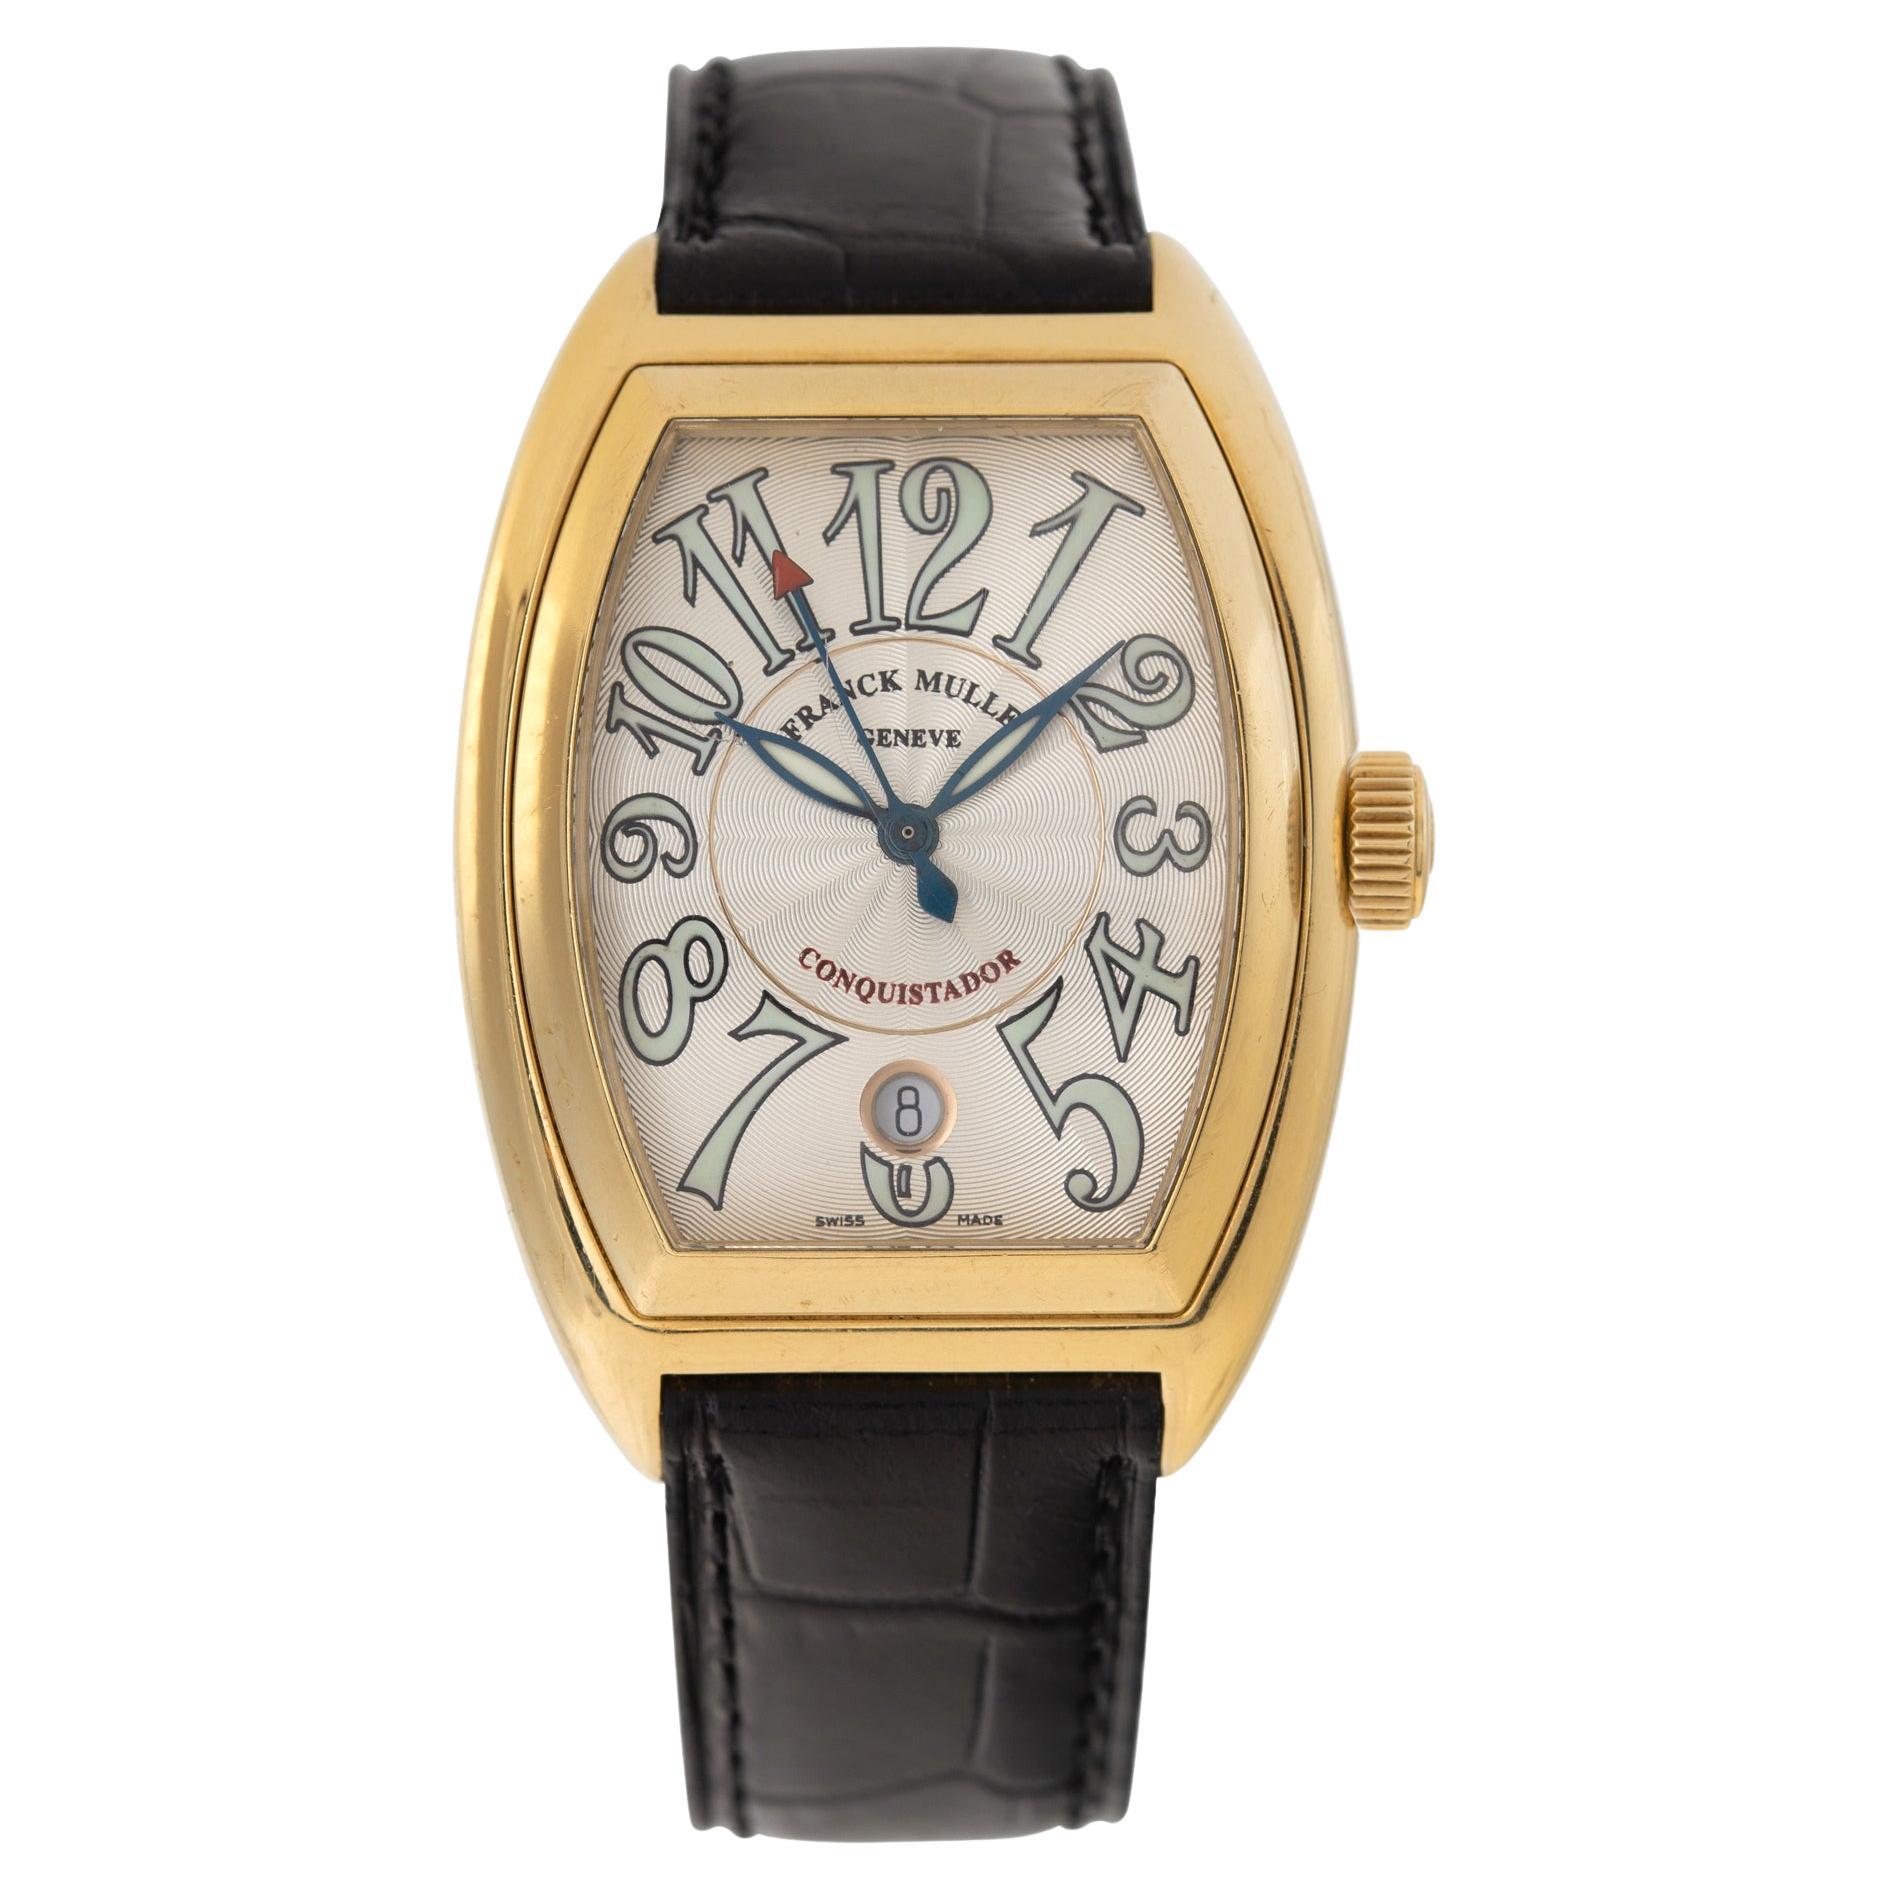 Franck Muller Conquistador 8001 sc in yellow gold with silver dial 35mm watch